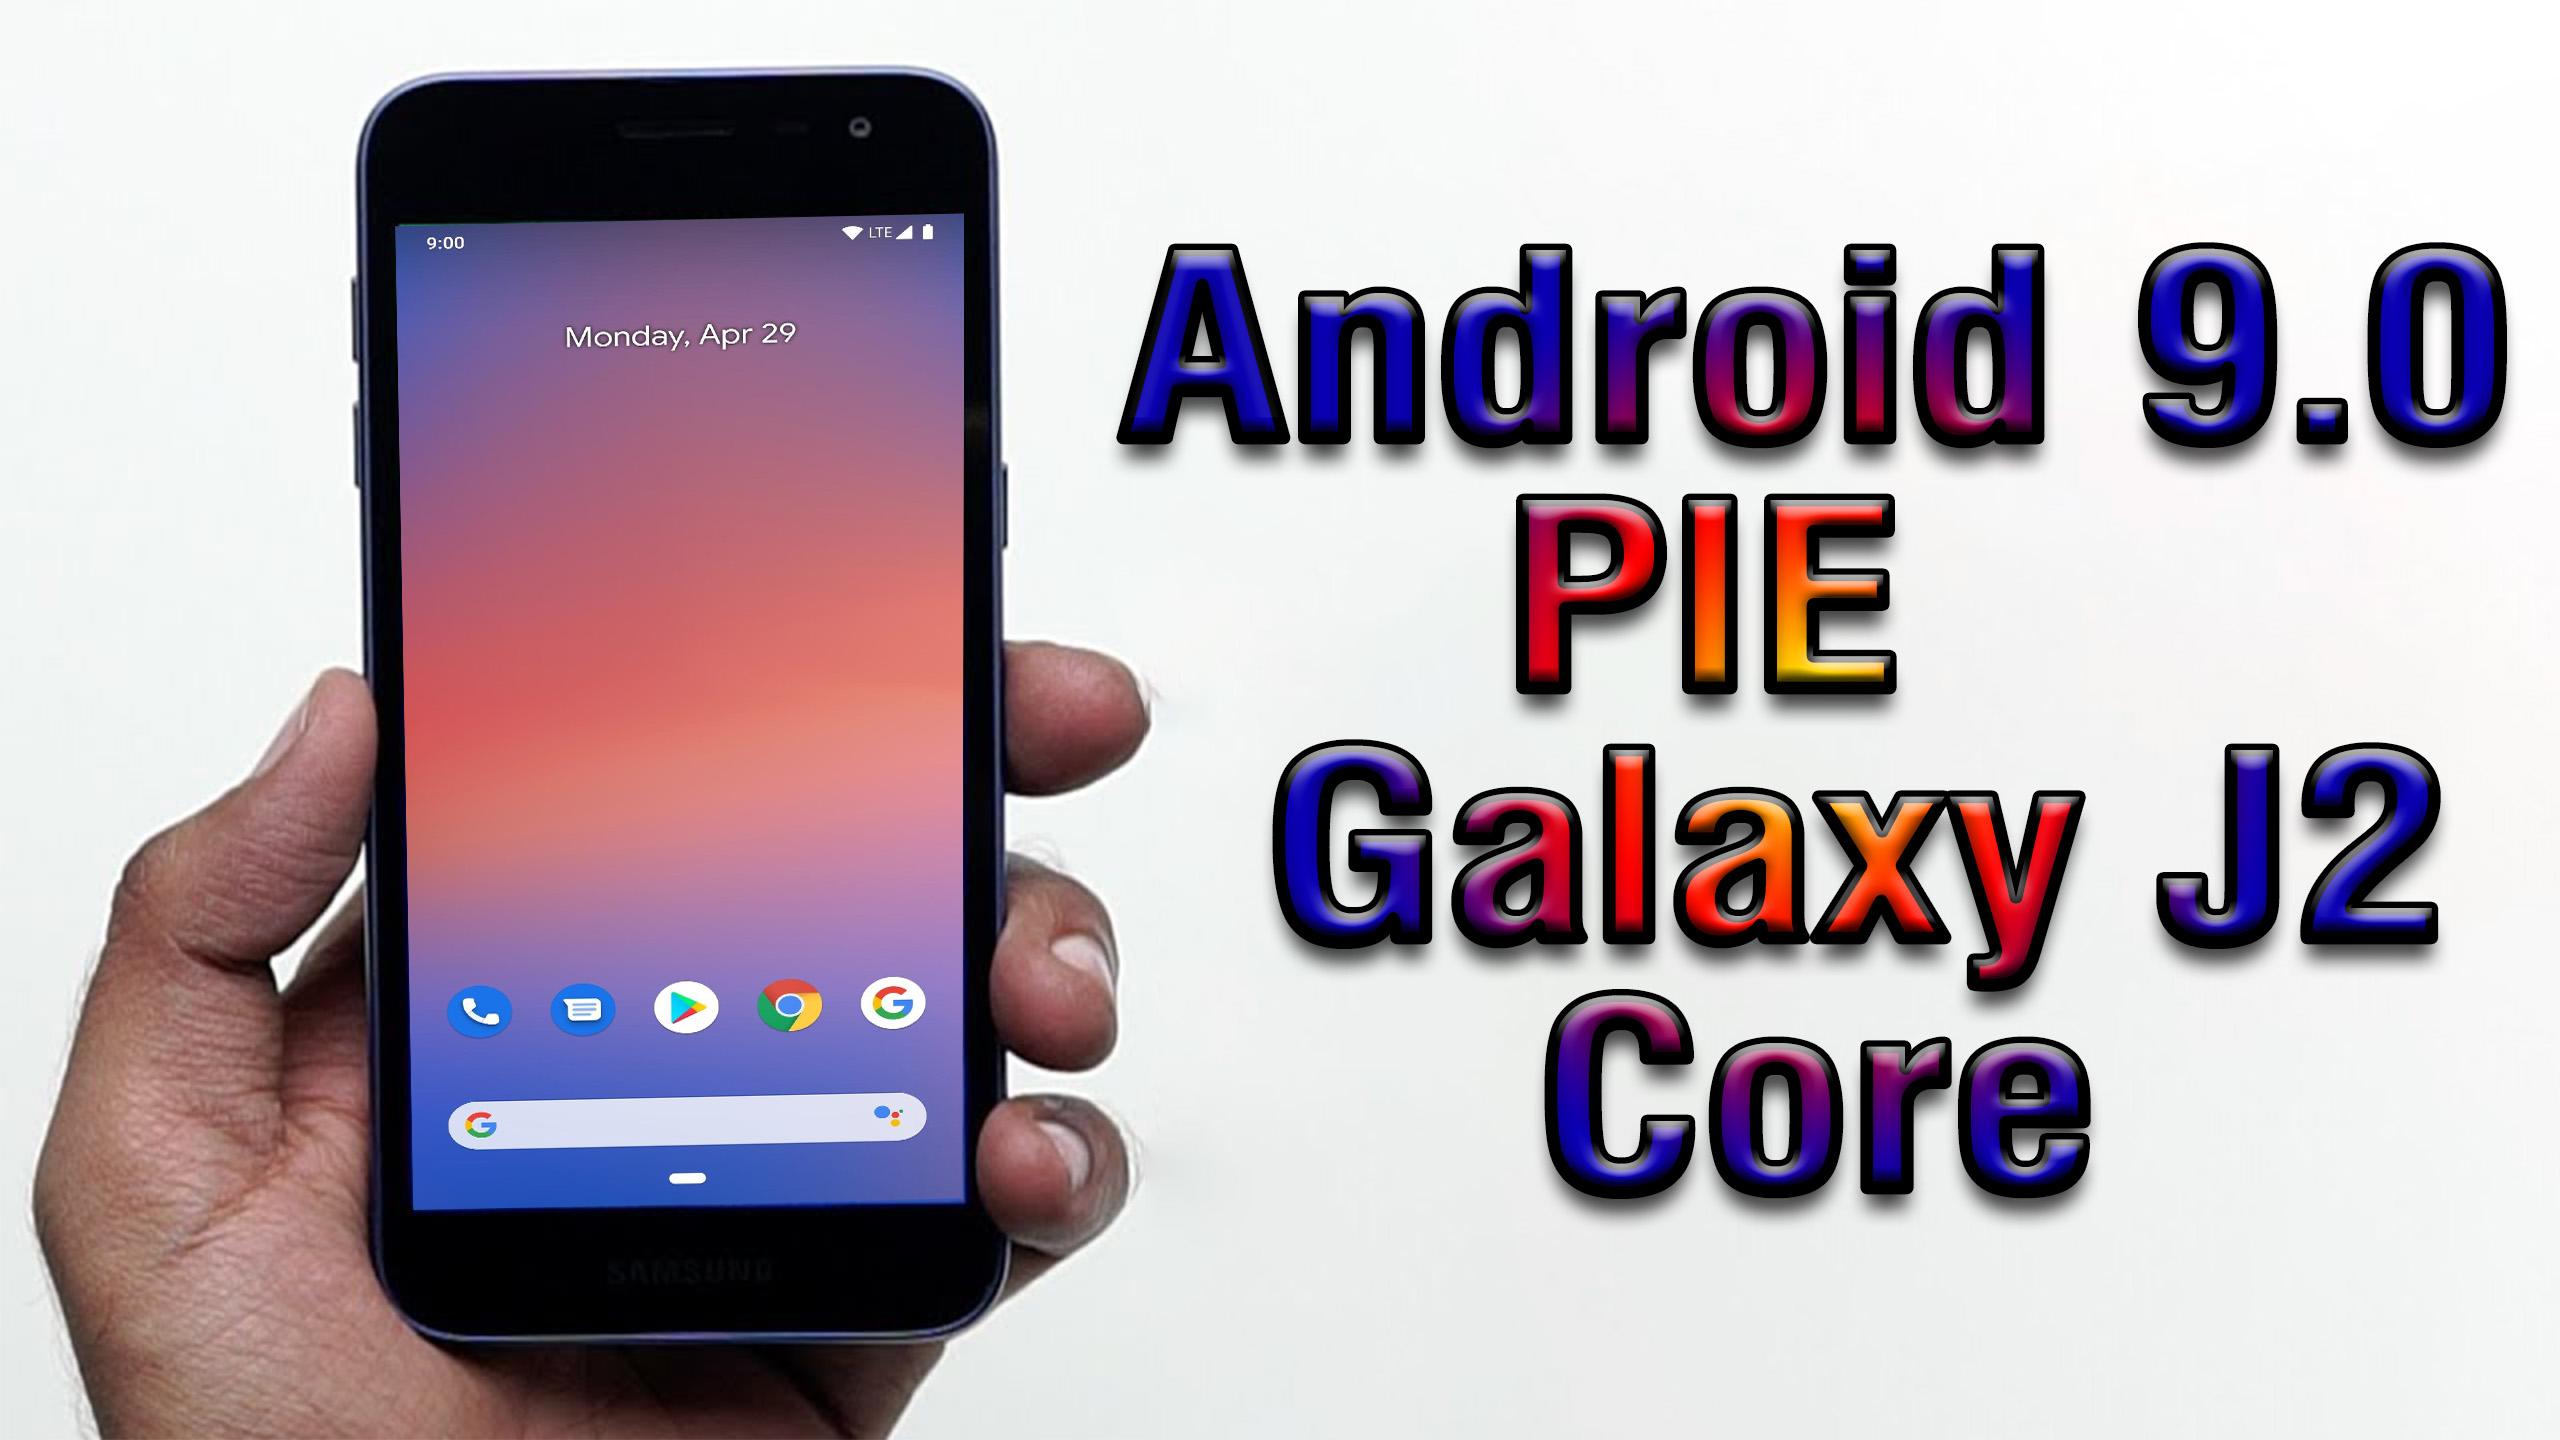 Install Android 9 0 Pie On Galaxy J2 Core Pixel Experience Rom How To Guide The Upgrade Guide